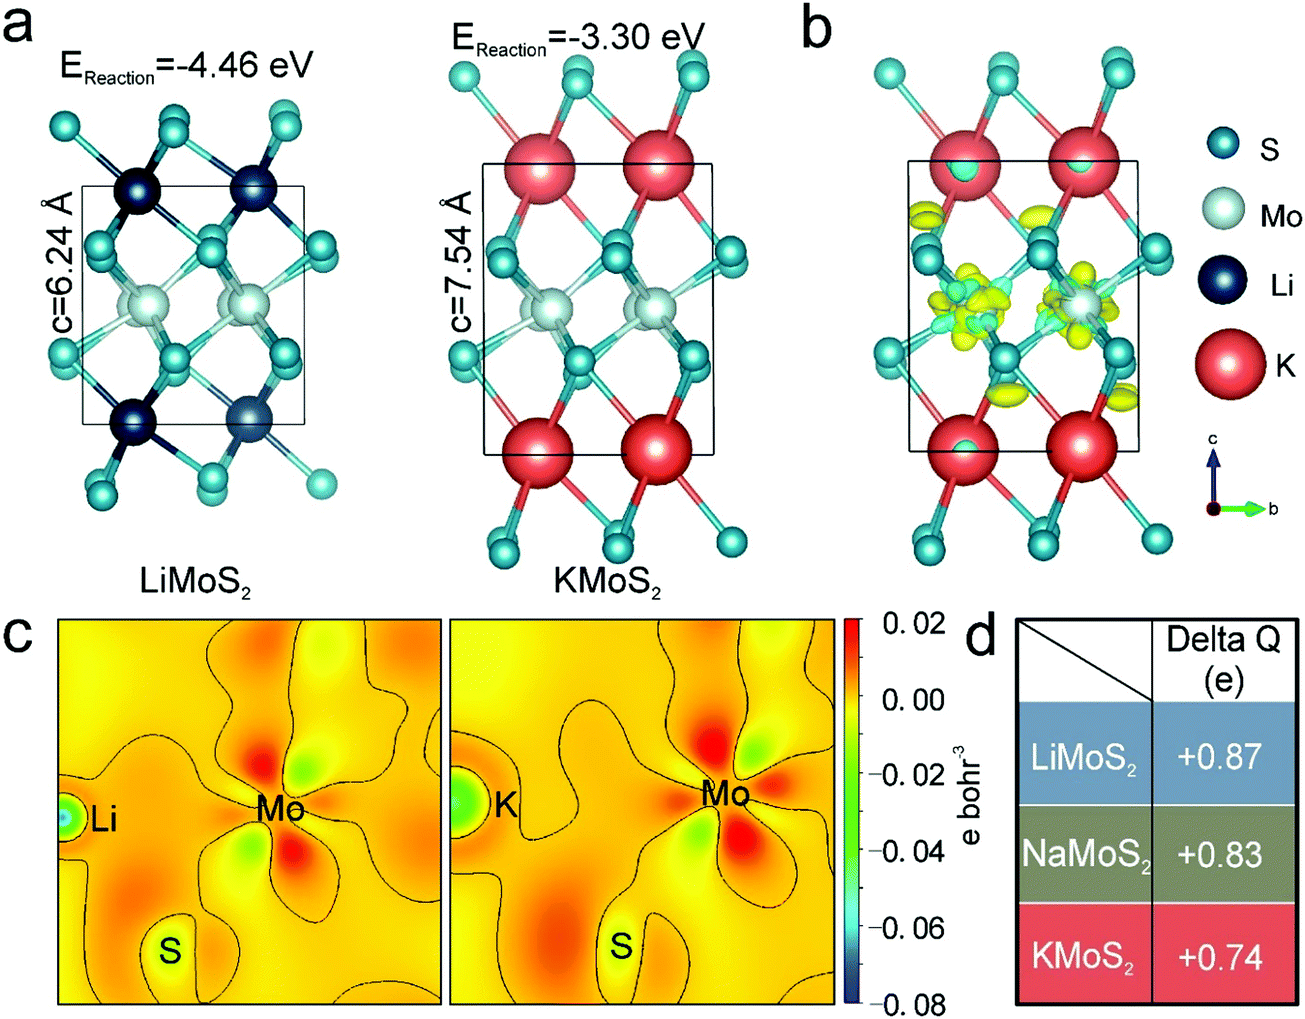 Exploring the structure evolution of MoS 2 upon Li/Na/K ion 